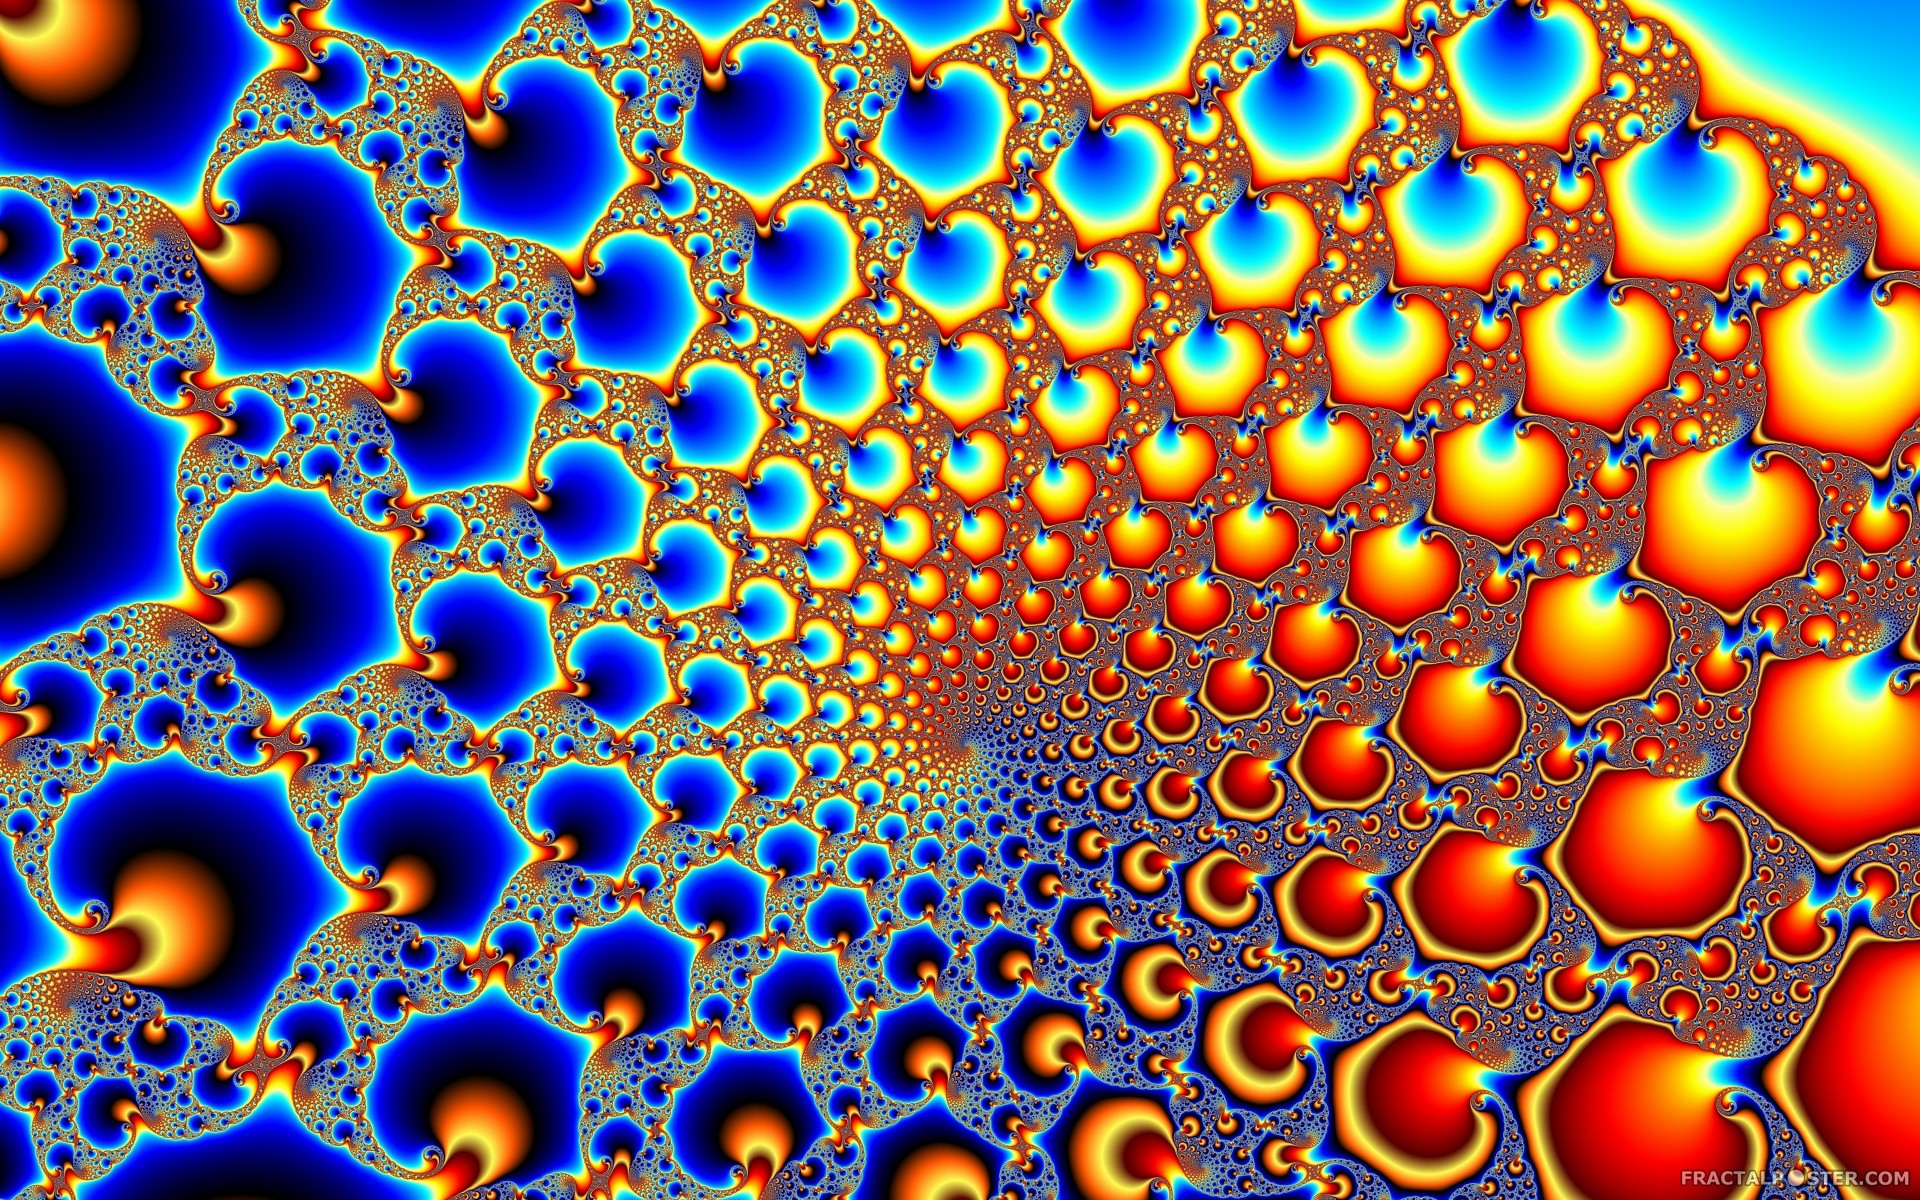 1920x1200 hipnotic posters | hypnotic portal" fractal image by pat197. HD Wallpapers,  posters .